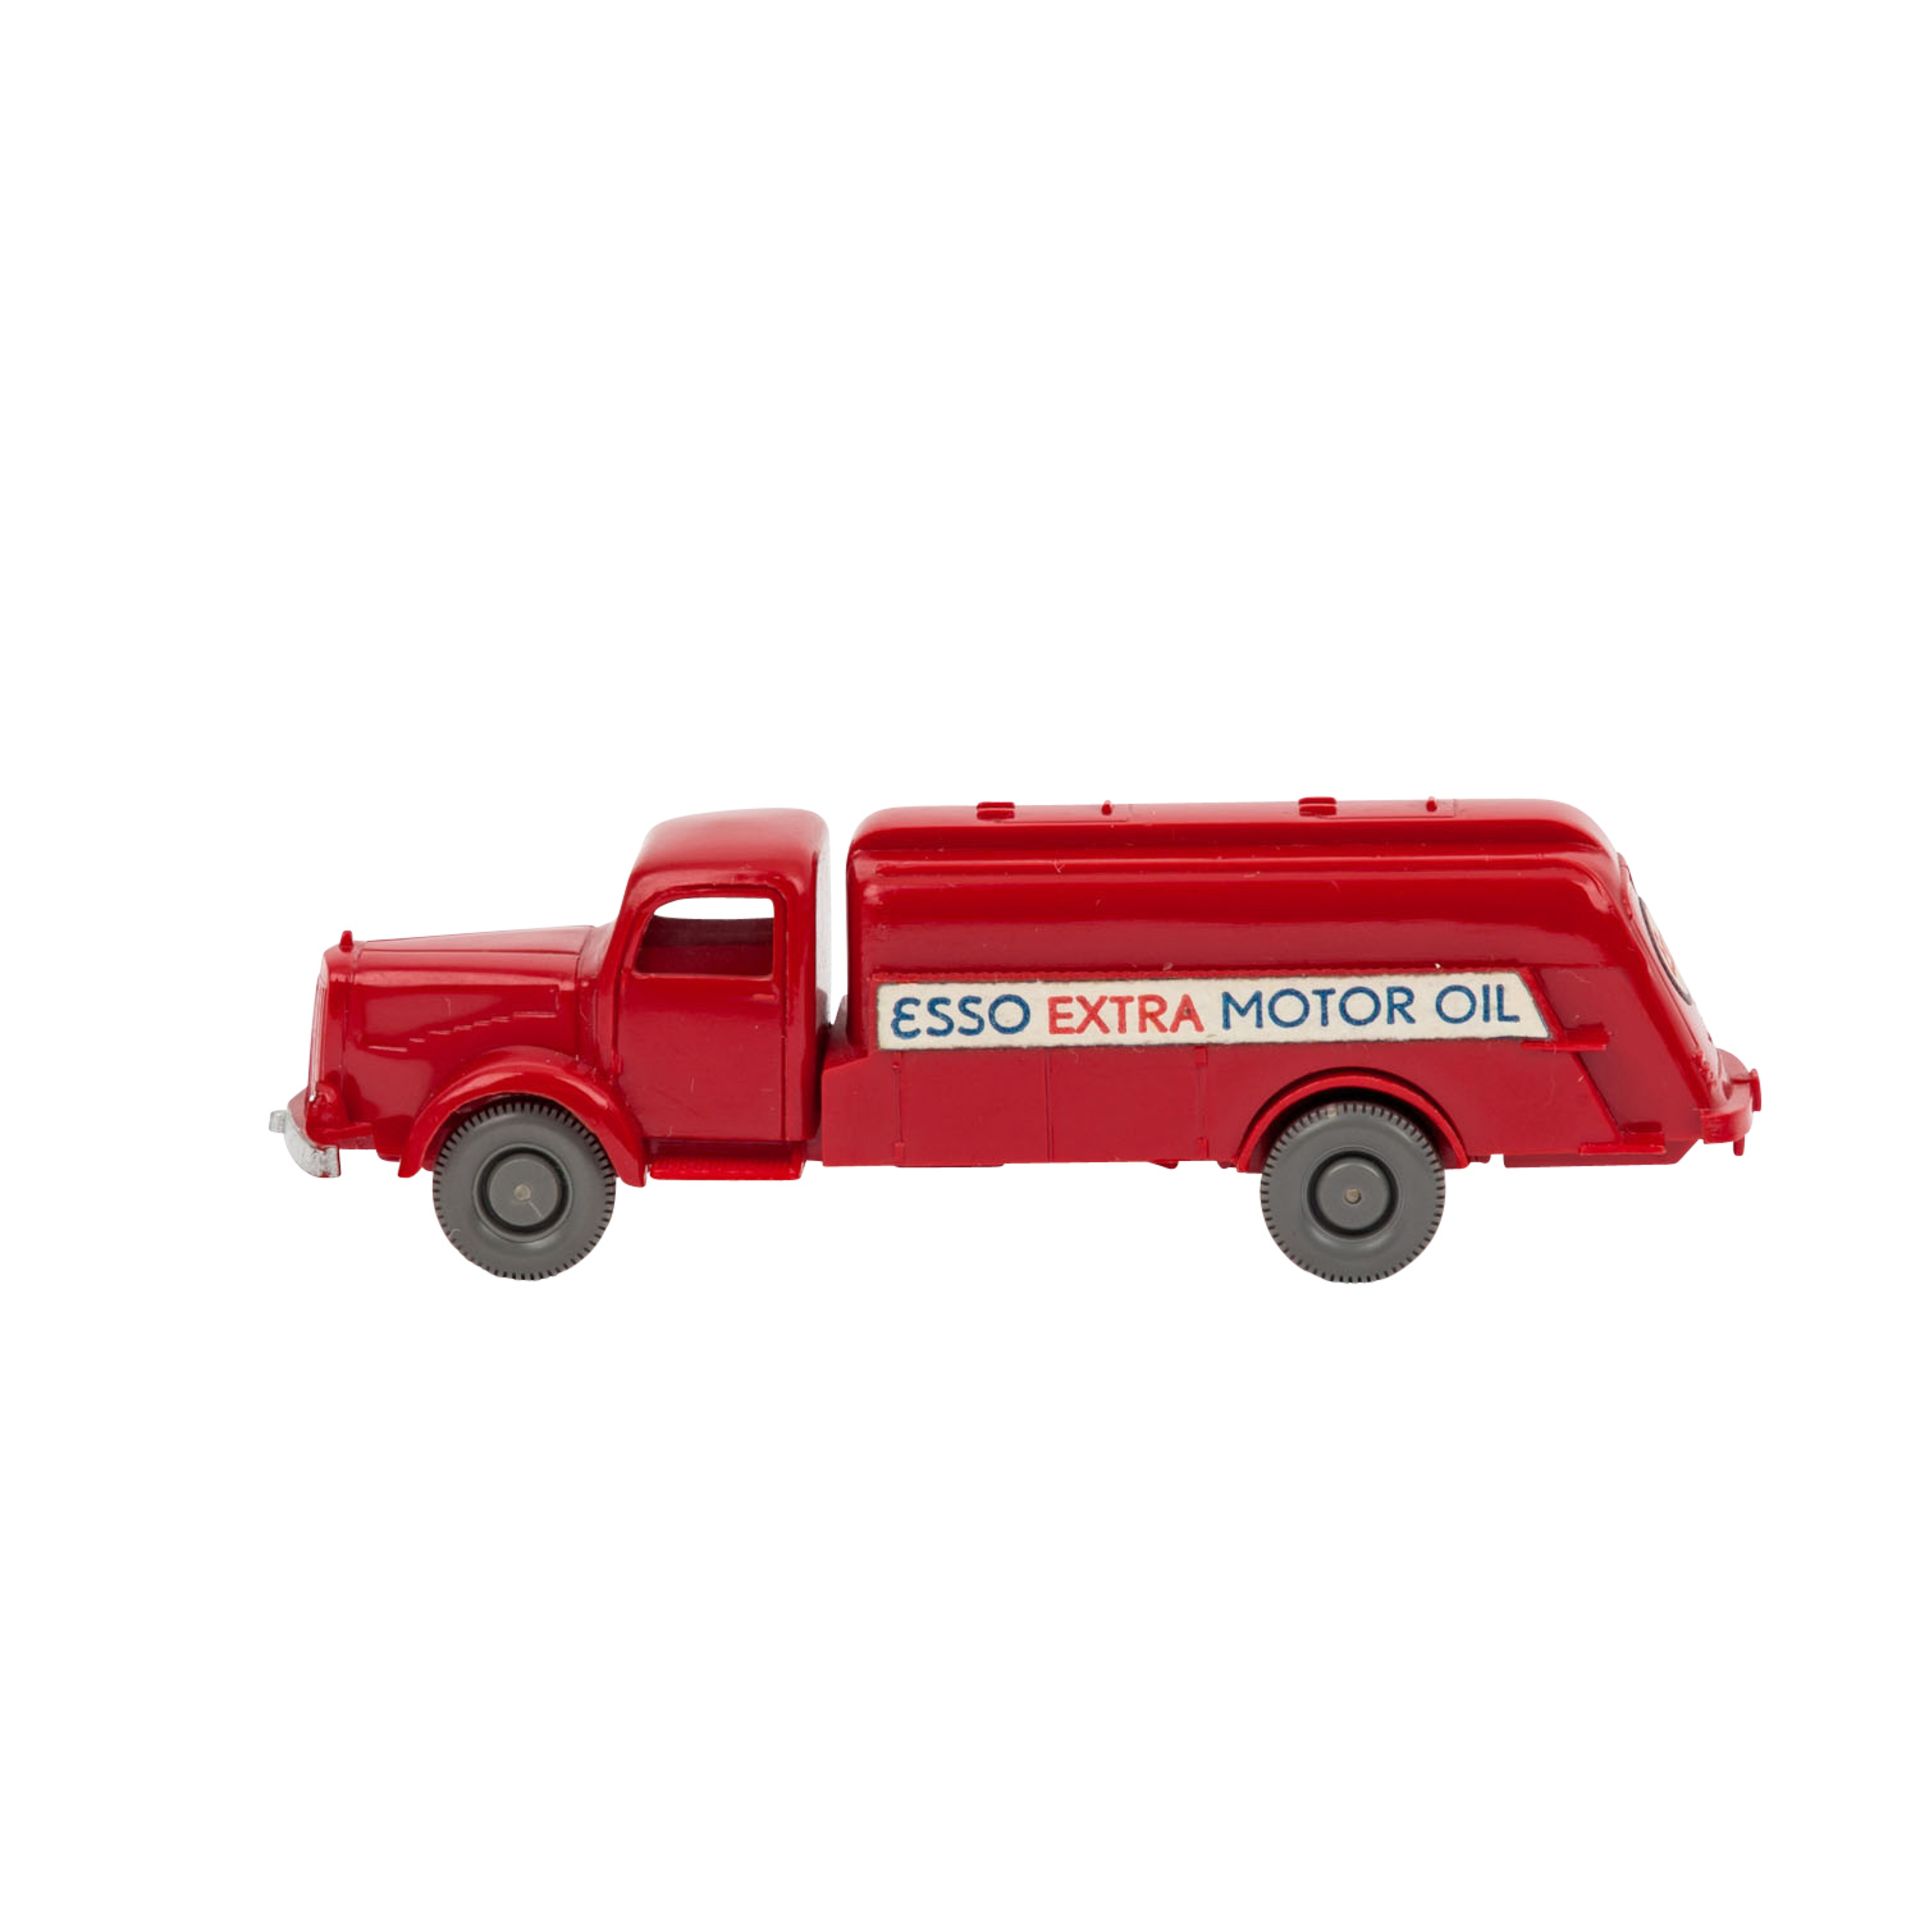 WIKING Mercedes "Esso-Tankwagen", 1962-63, MB L 5000, roter Aufbau und Chassis, Bodenp - Image 2 of 5